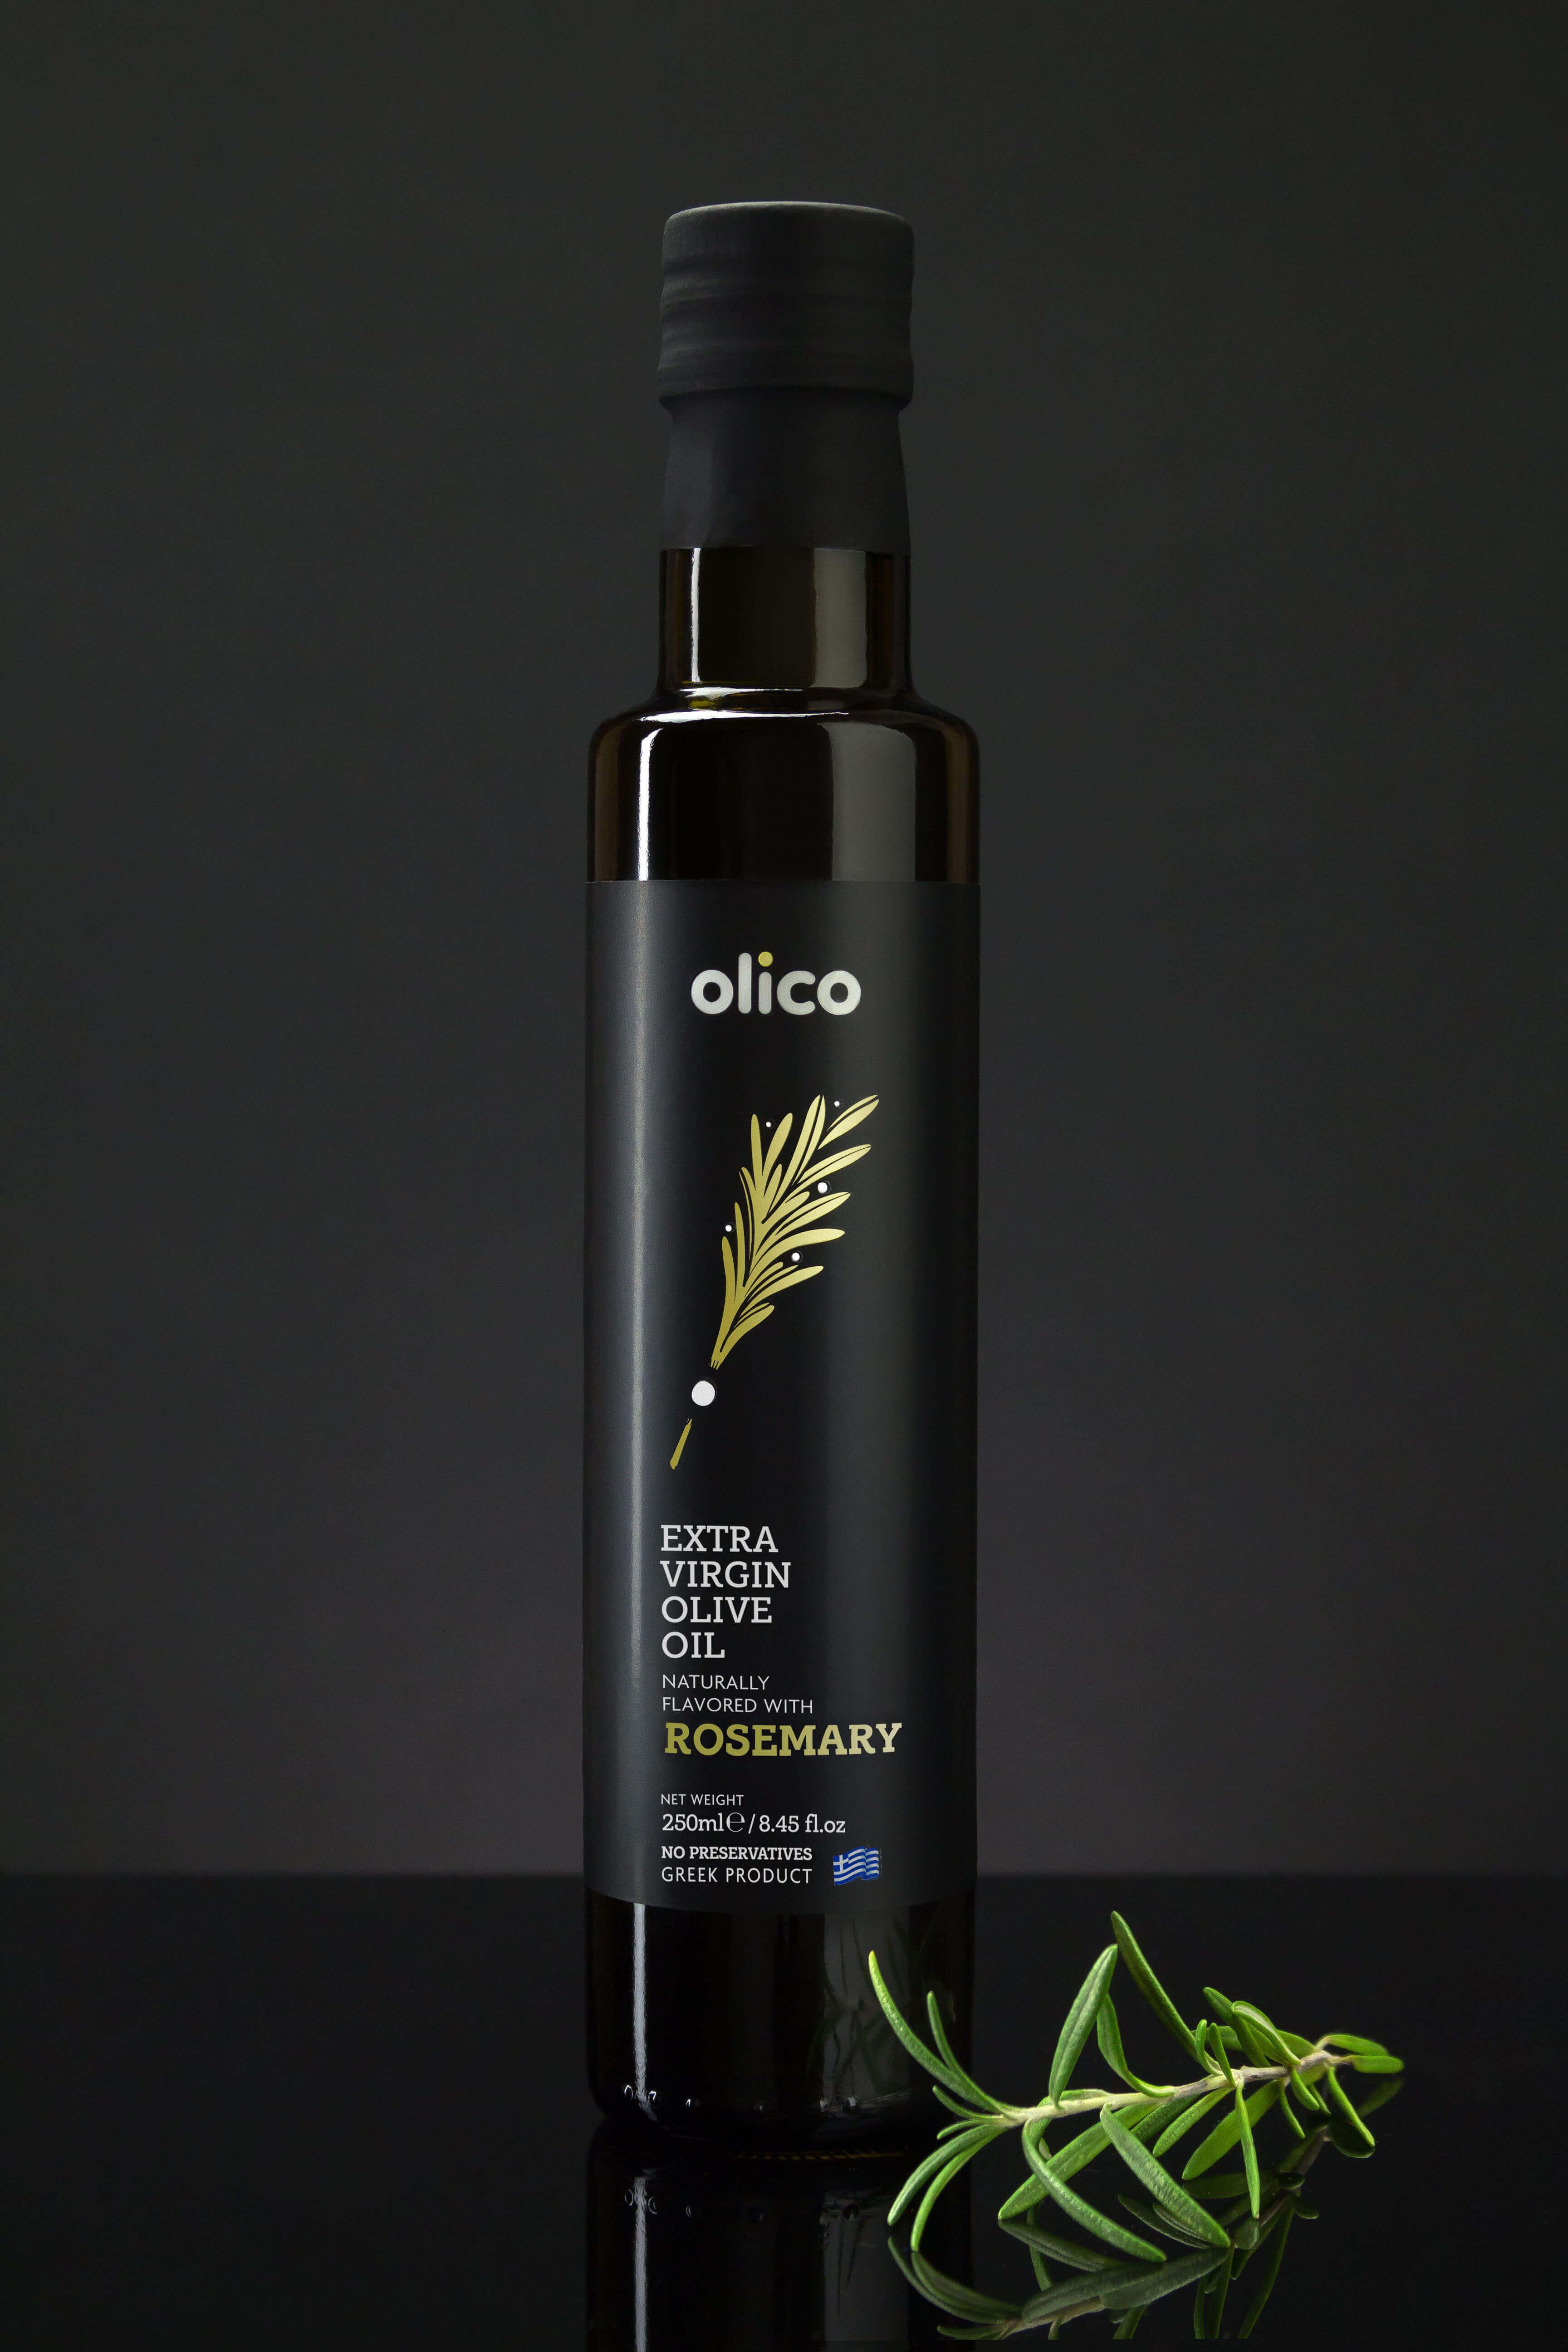 GOURMET EXTRA VIRGIN OLIVE OIL NATURALLY FLAVORED WITH ROSEMARY